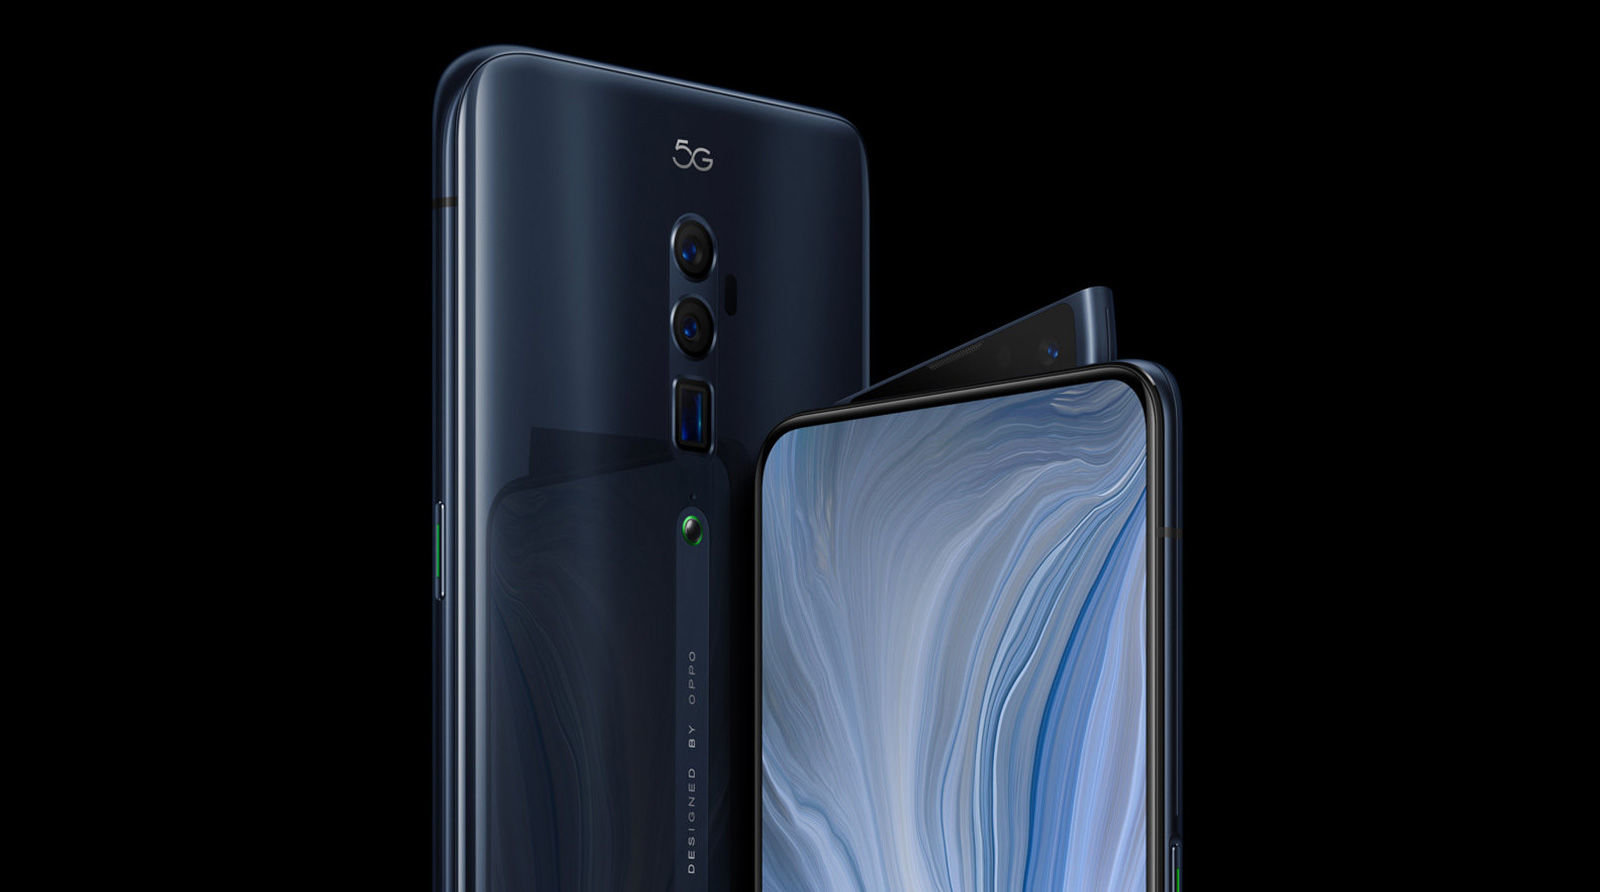 Oppo Reno 10x is a new series of Reno Oppo